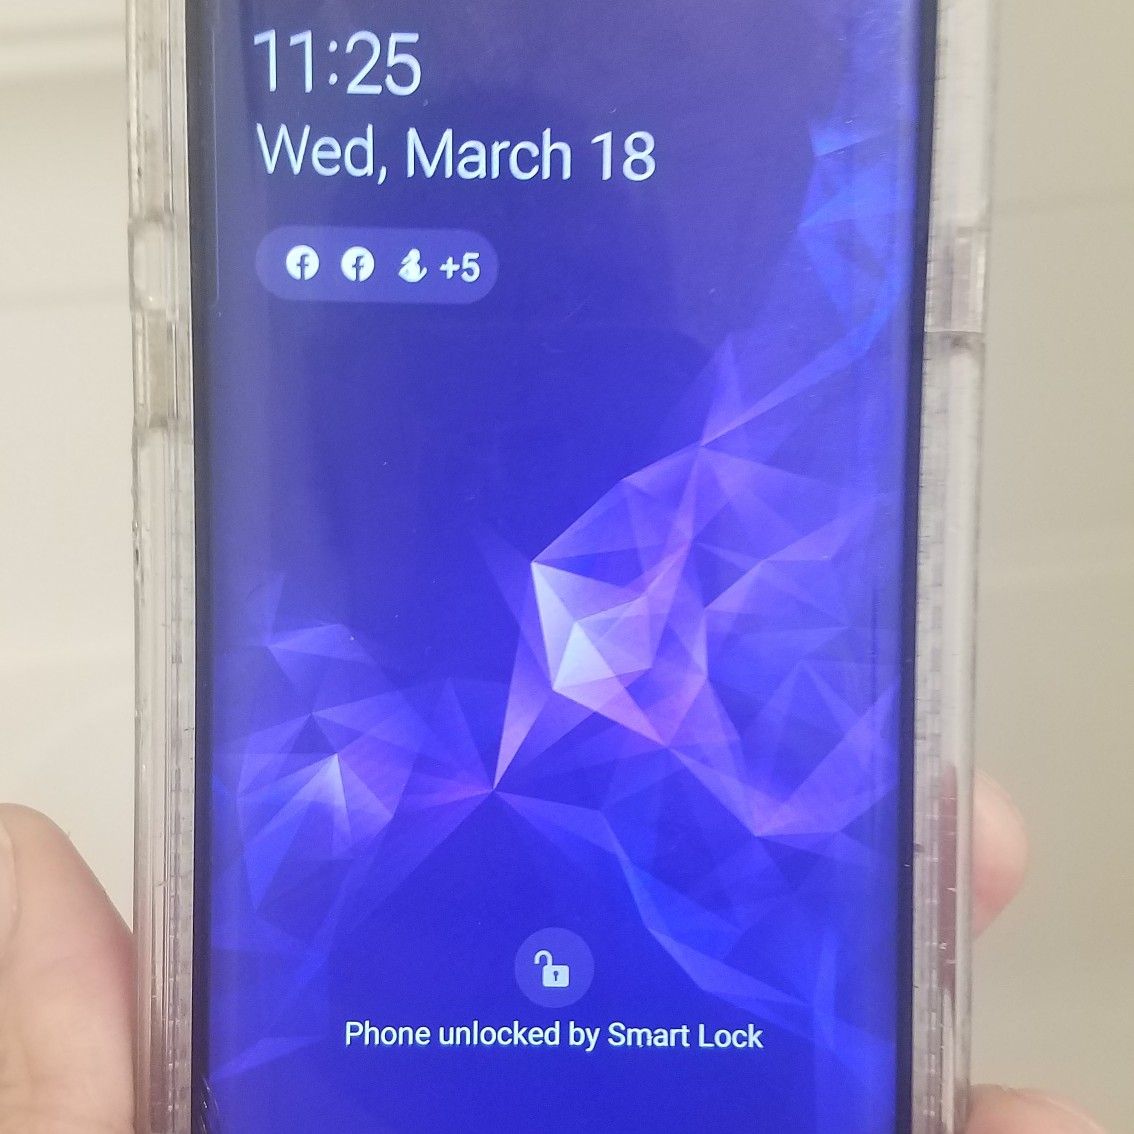 Samsung Galaxy S9 Android phone has A lil crack in left corner its in good condition im askin $300 lowest i take $280